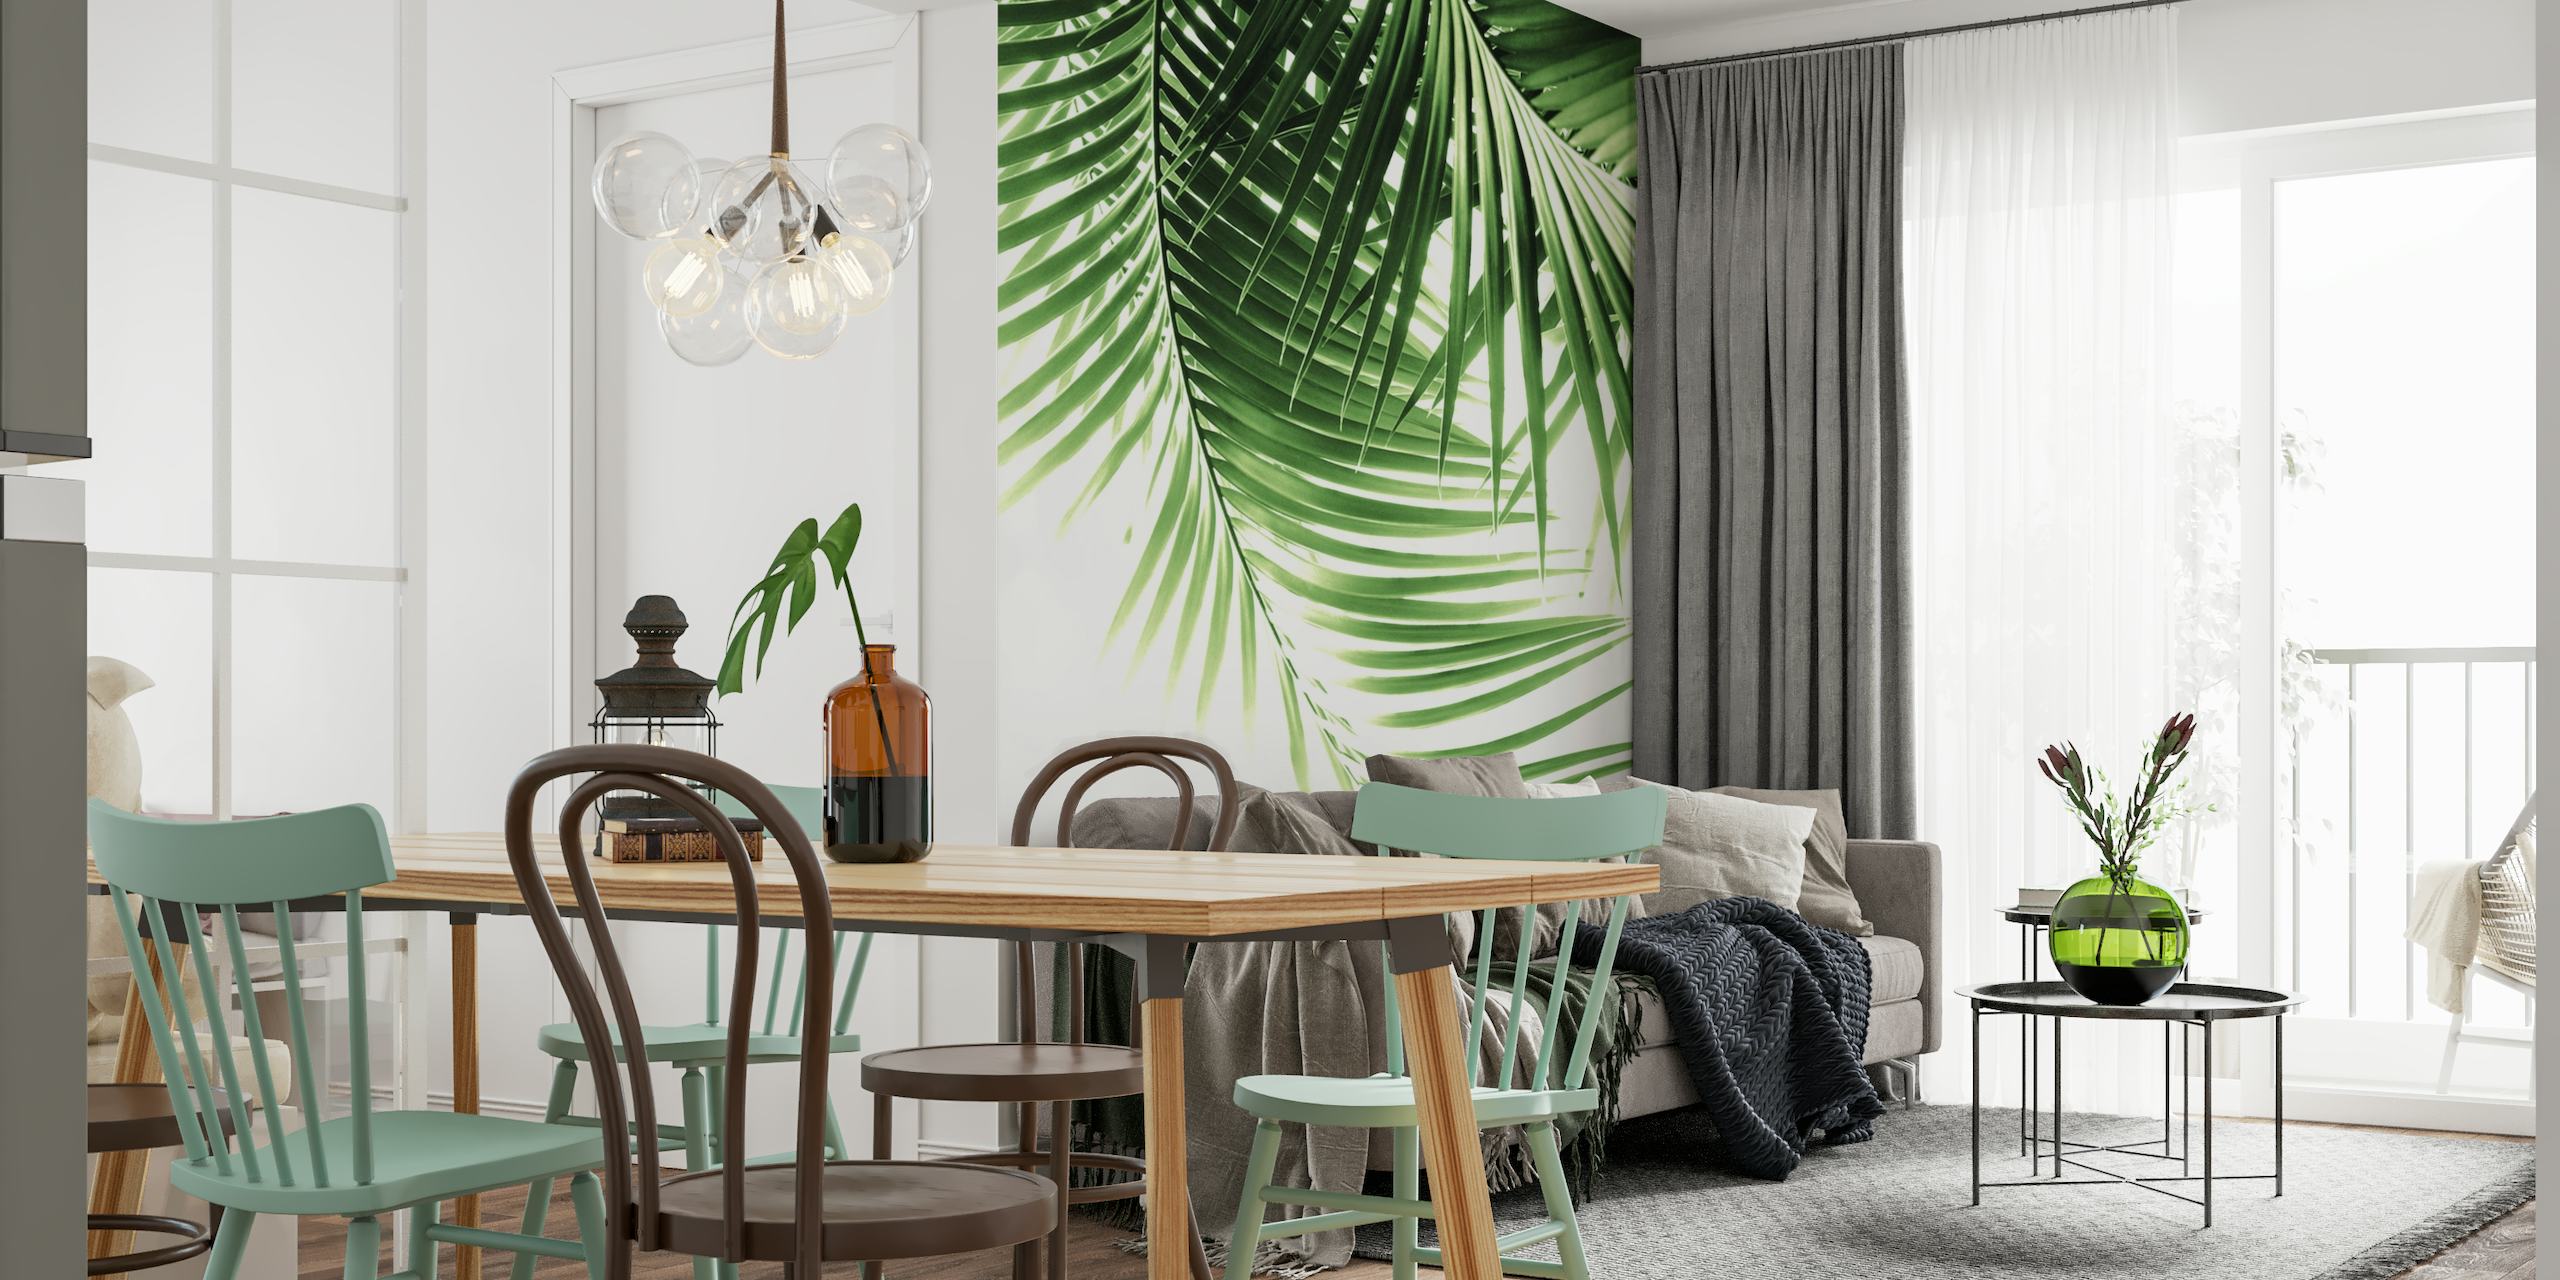 Palm Leaves Green Vibes 9 wallpaper